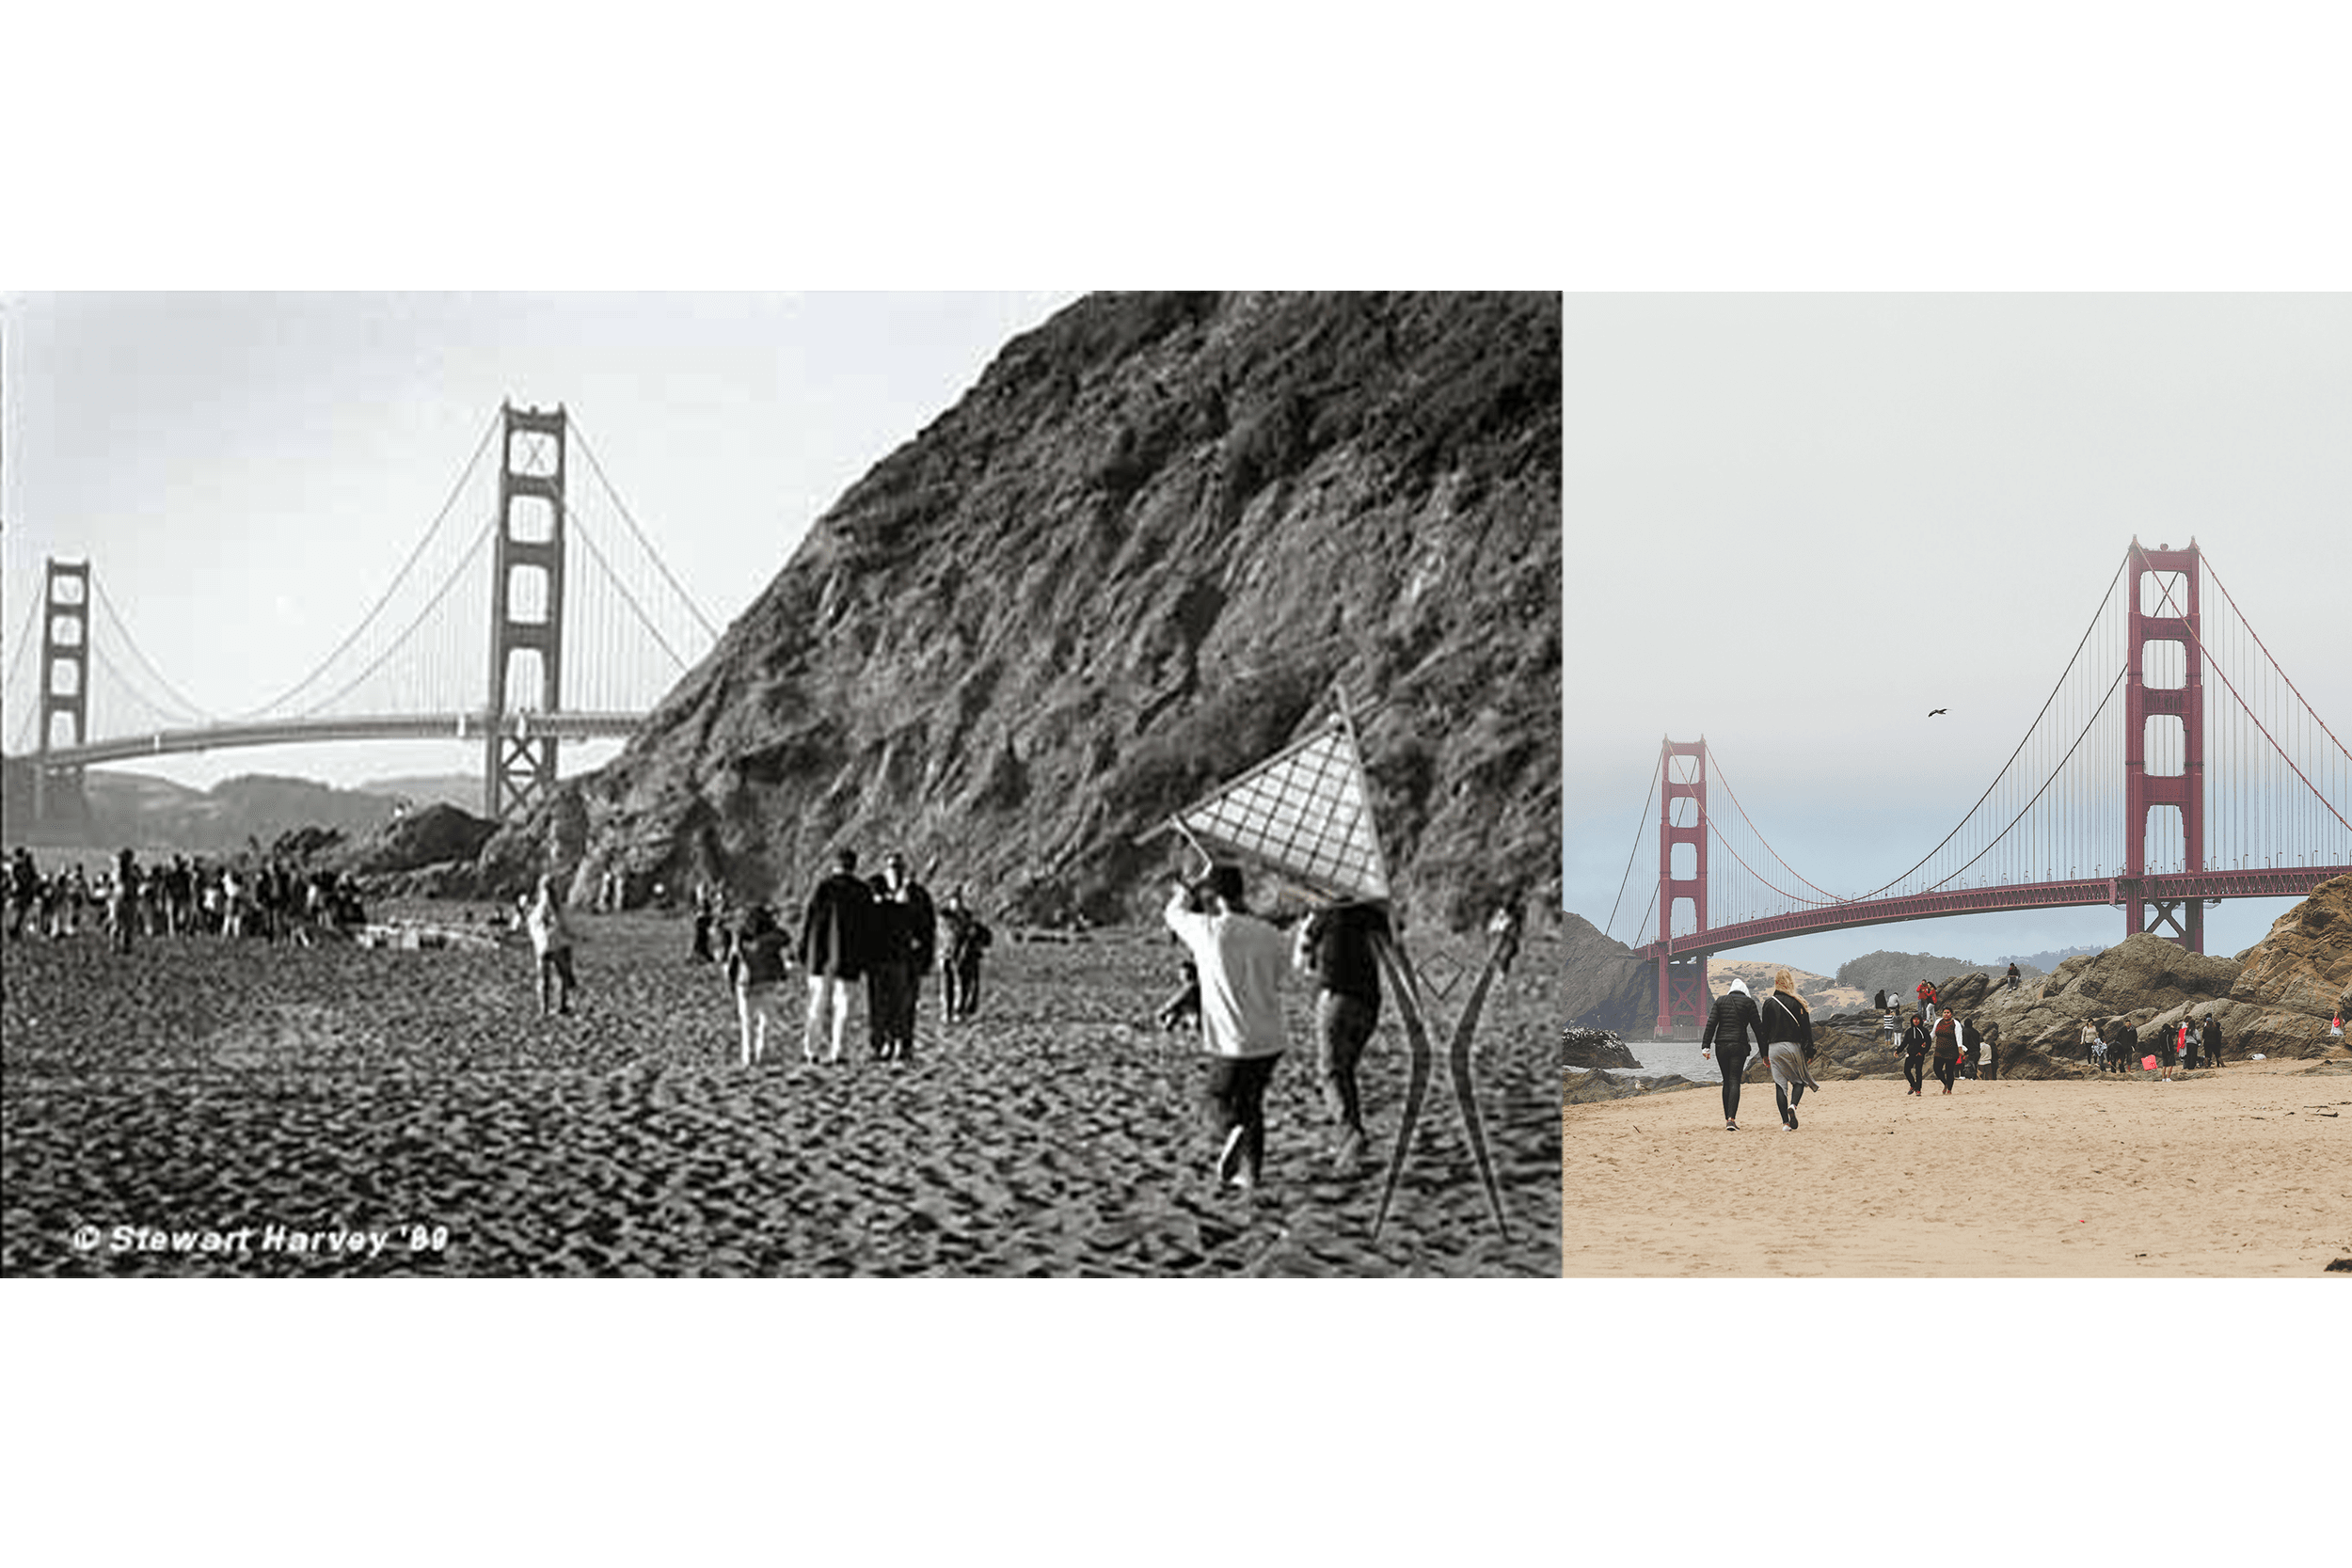 Burning Man then and now at Baker Beach